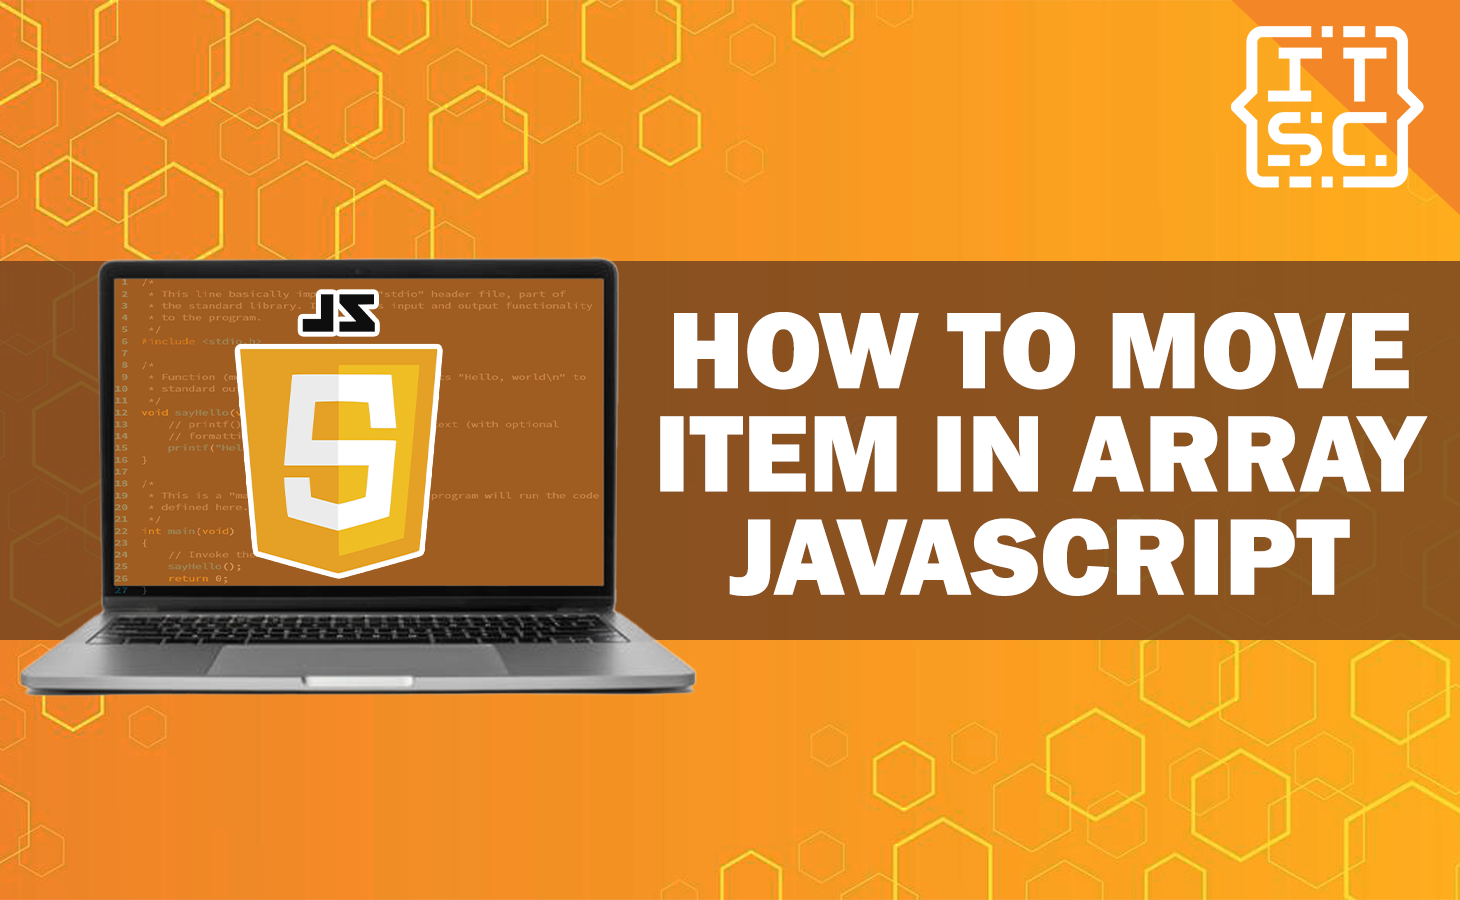 How to Move Item in Array JavaScript